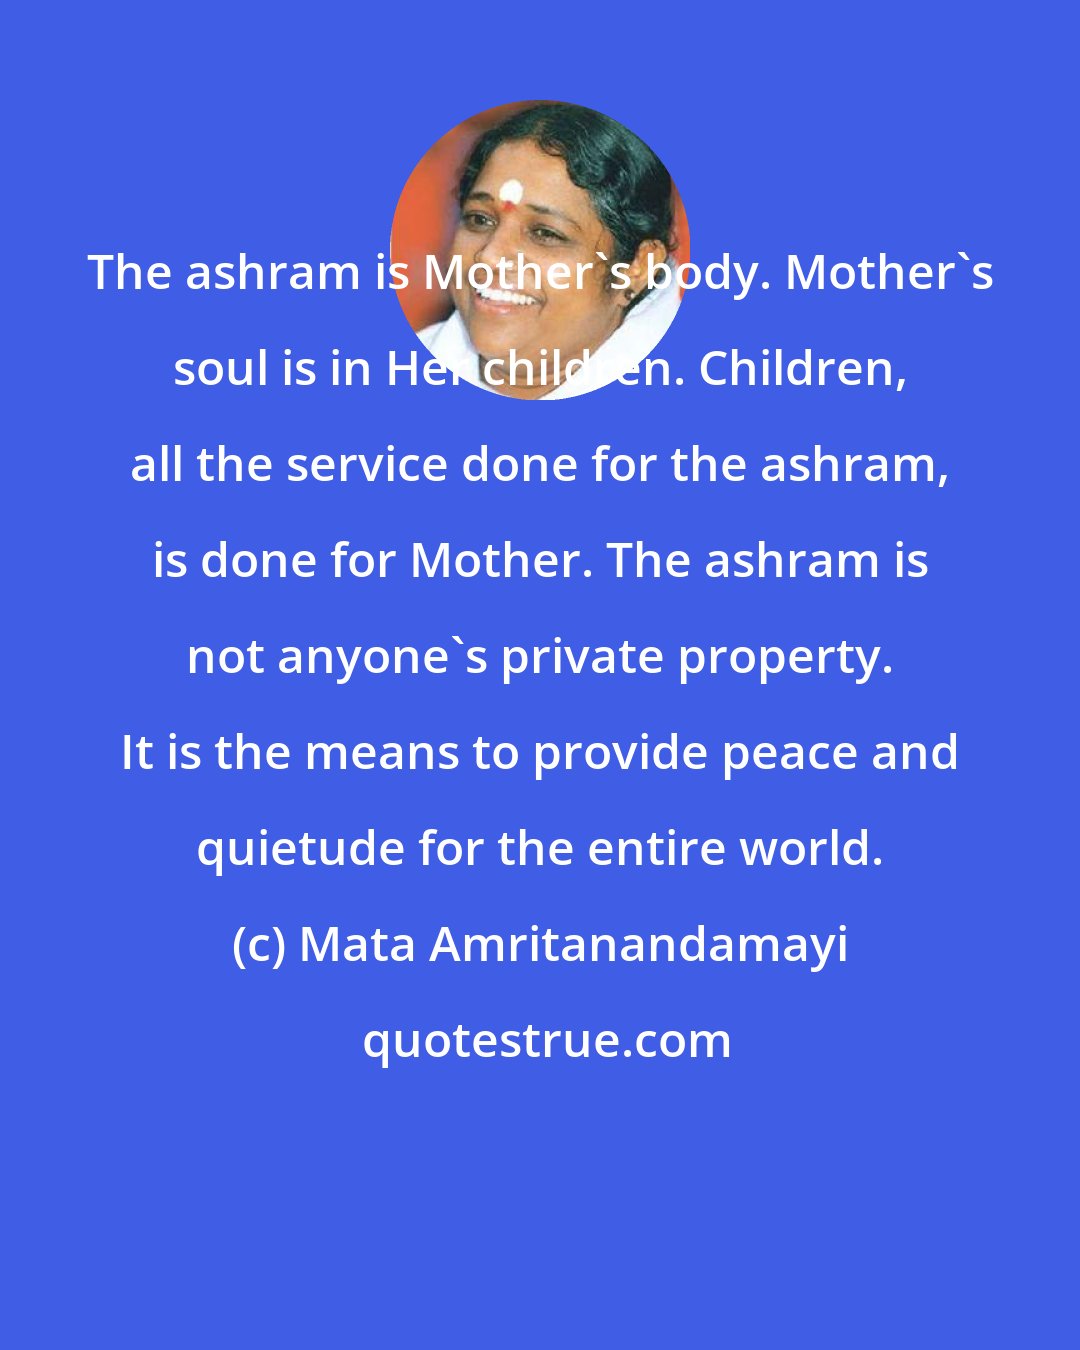 Mata Amritanandamayi: The ashram is Mother's body. Mother's soul is in Her children. Children, all the service done for the ashram, is done for Mother. The ashram is not anyone's private property. It is the means to provide peace and quietude for the entire world.